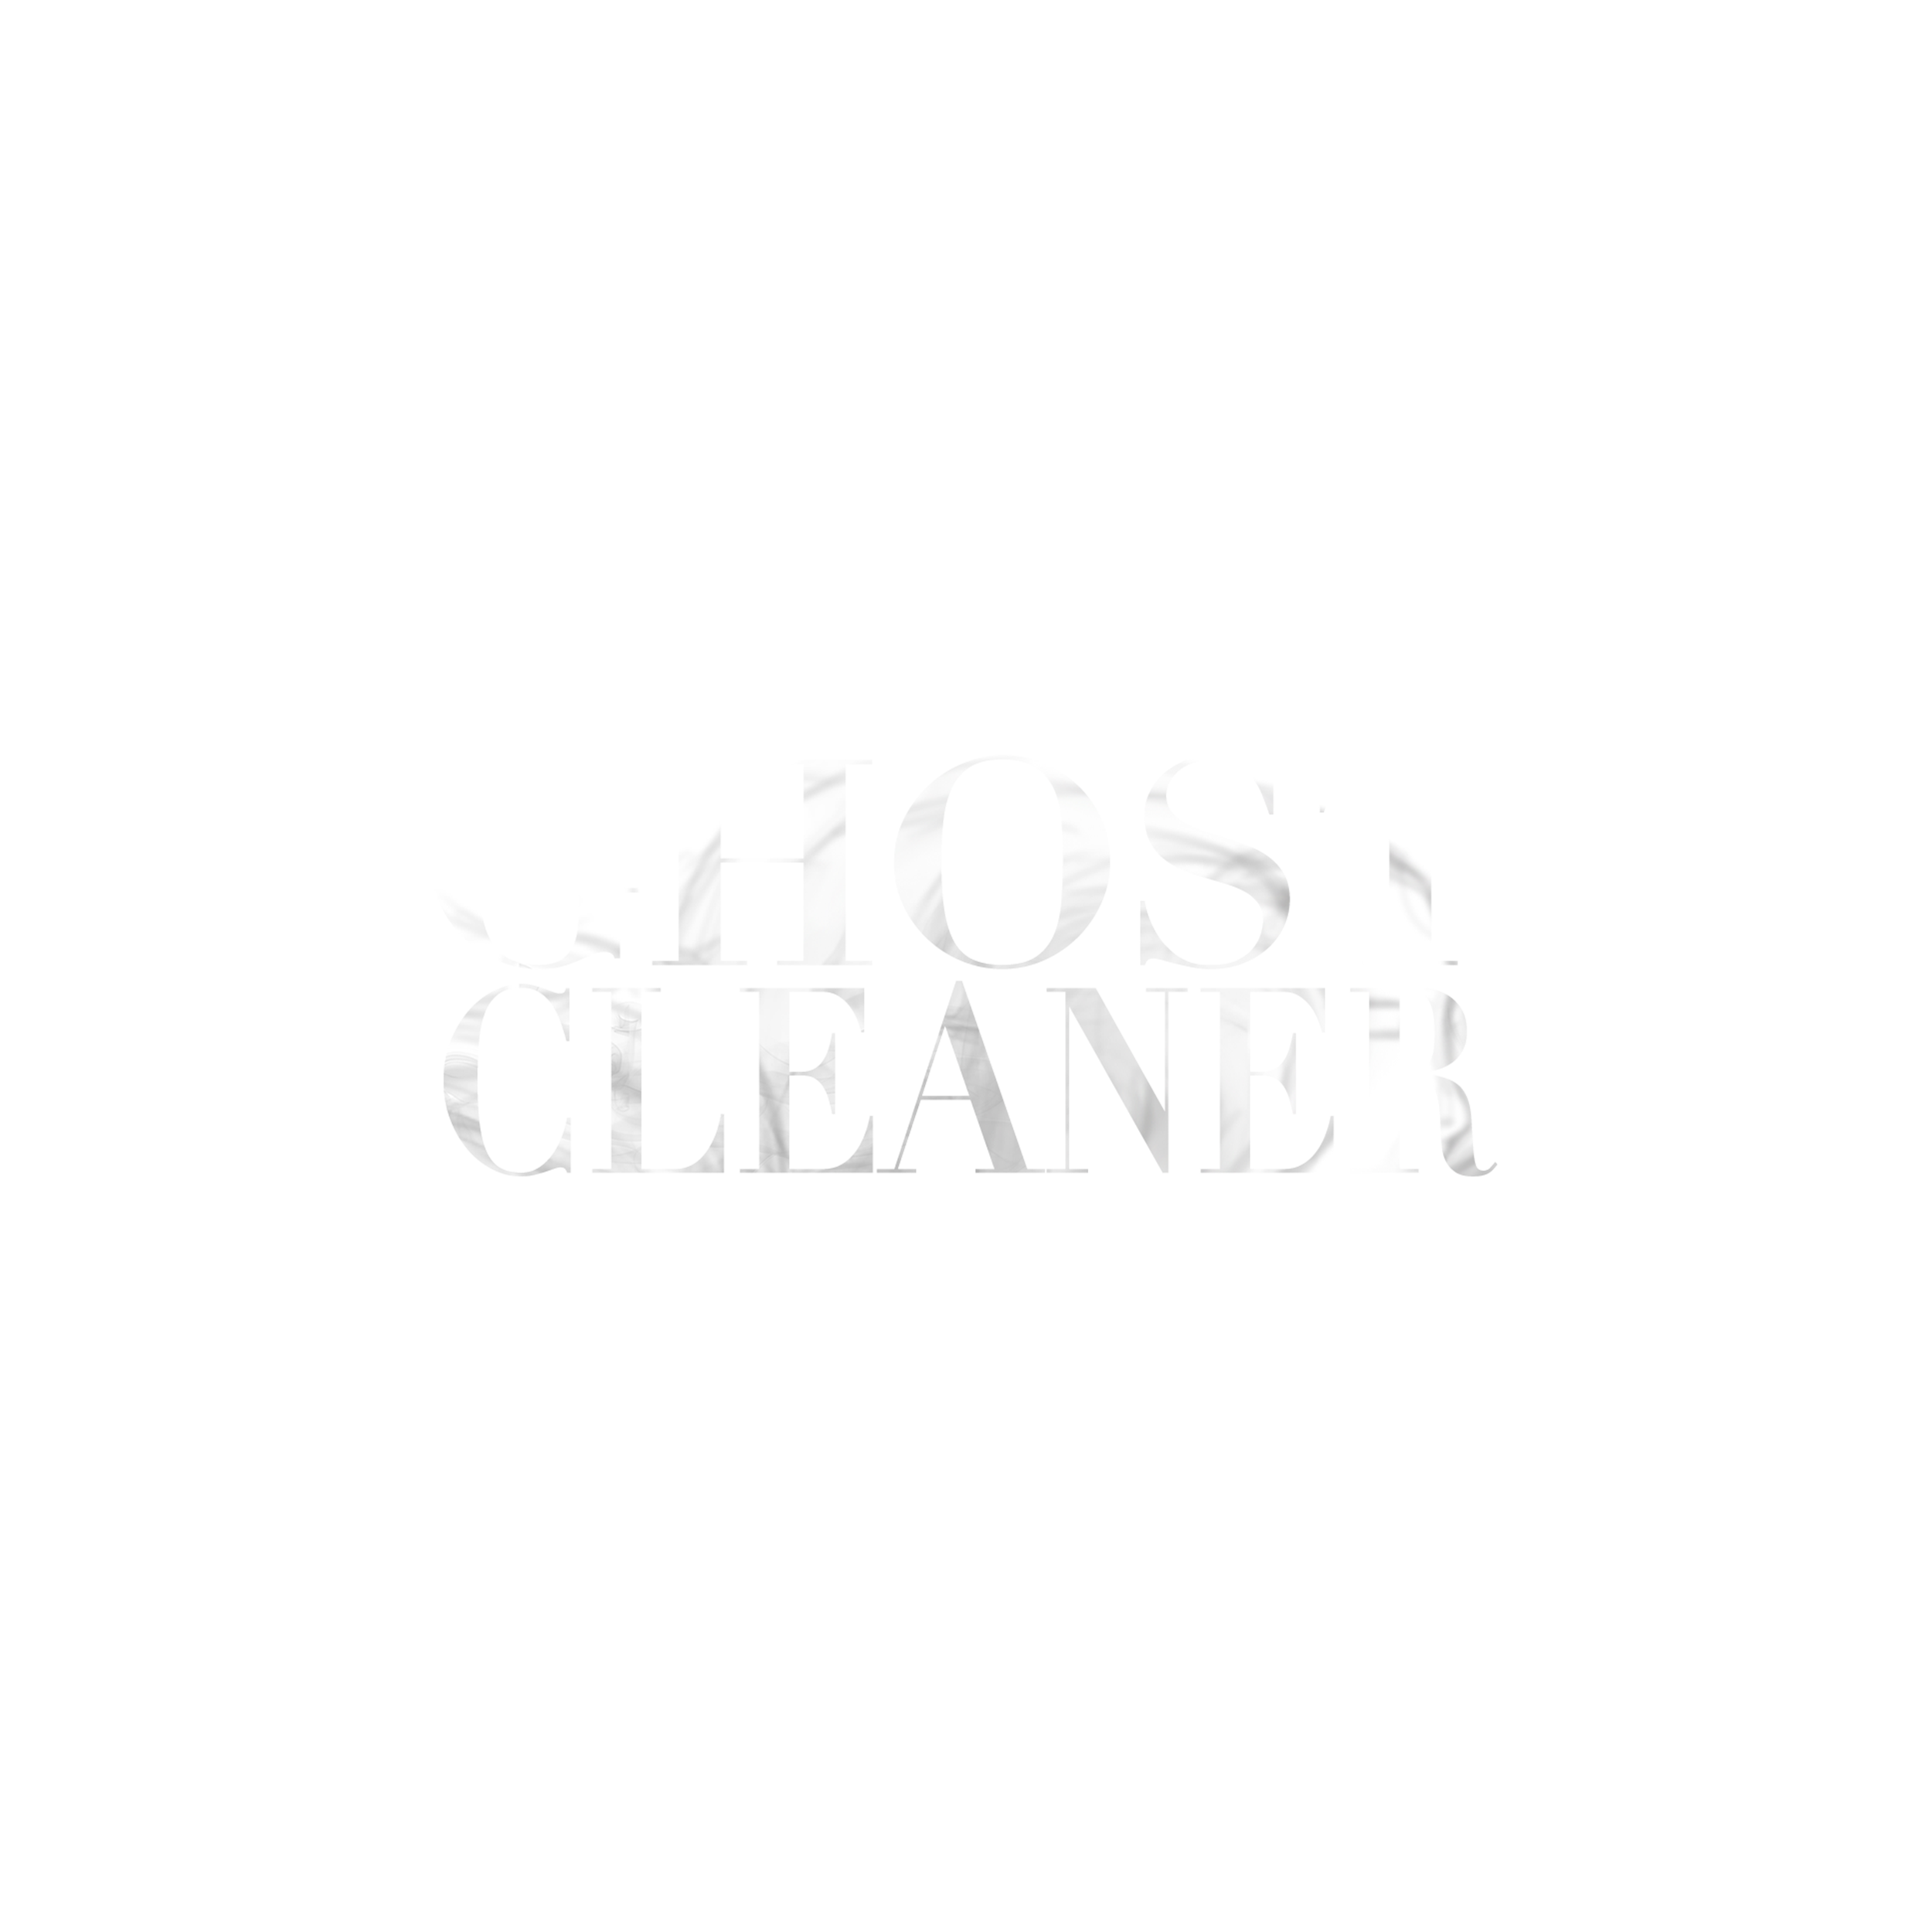 Ghost Cleaner logo